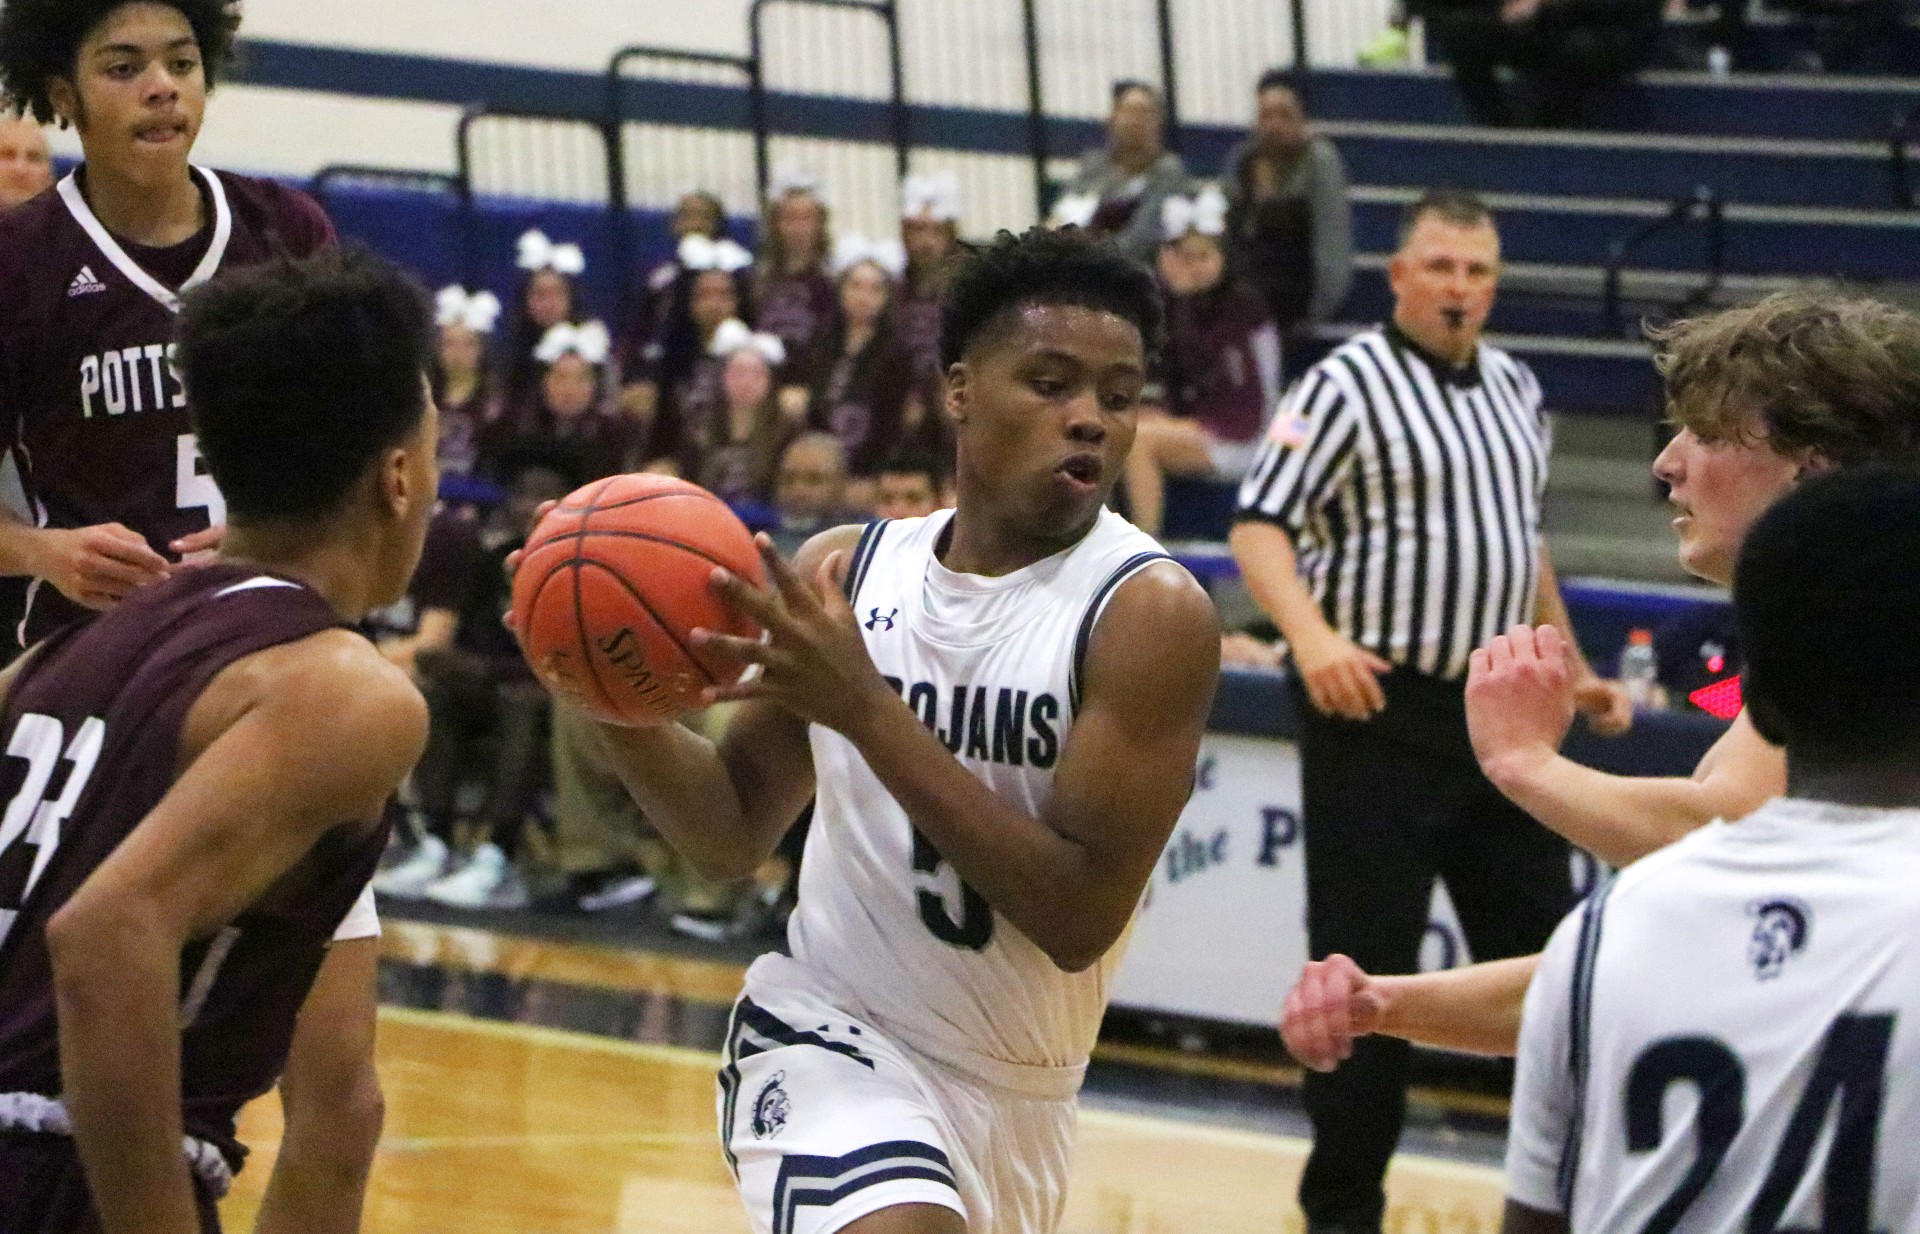 Pottstown boys basketball outlasts Pottsgrove in second half surge, claims first PAC Frontier win